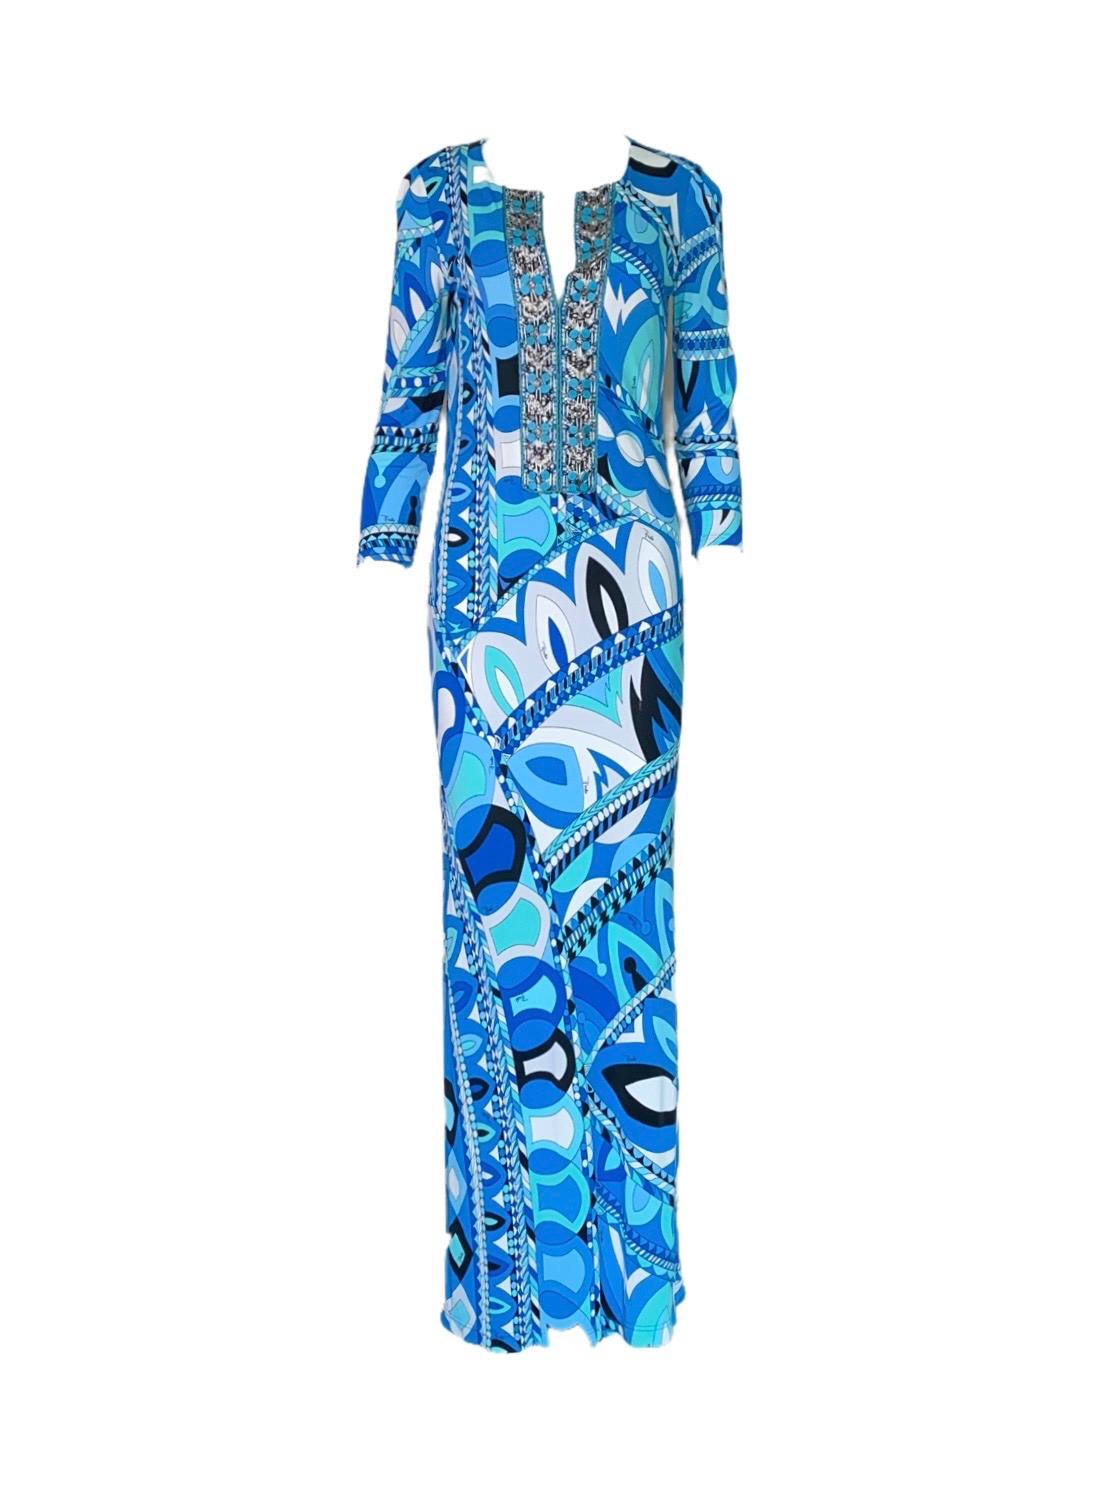 Women's NEW Emilio Pucci Embroidered Signature Print Embellished Tunic Maxi Dress Gown